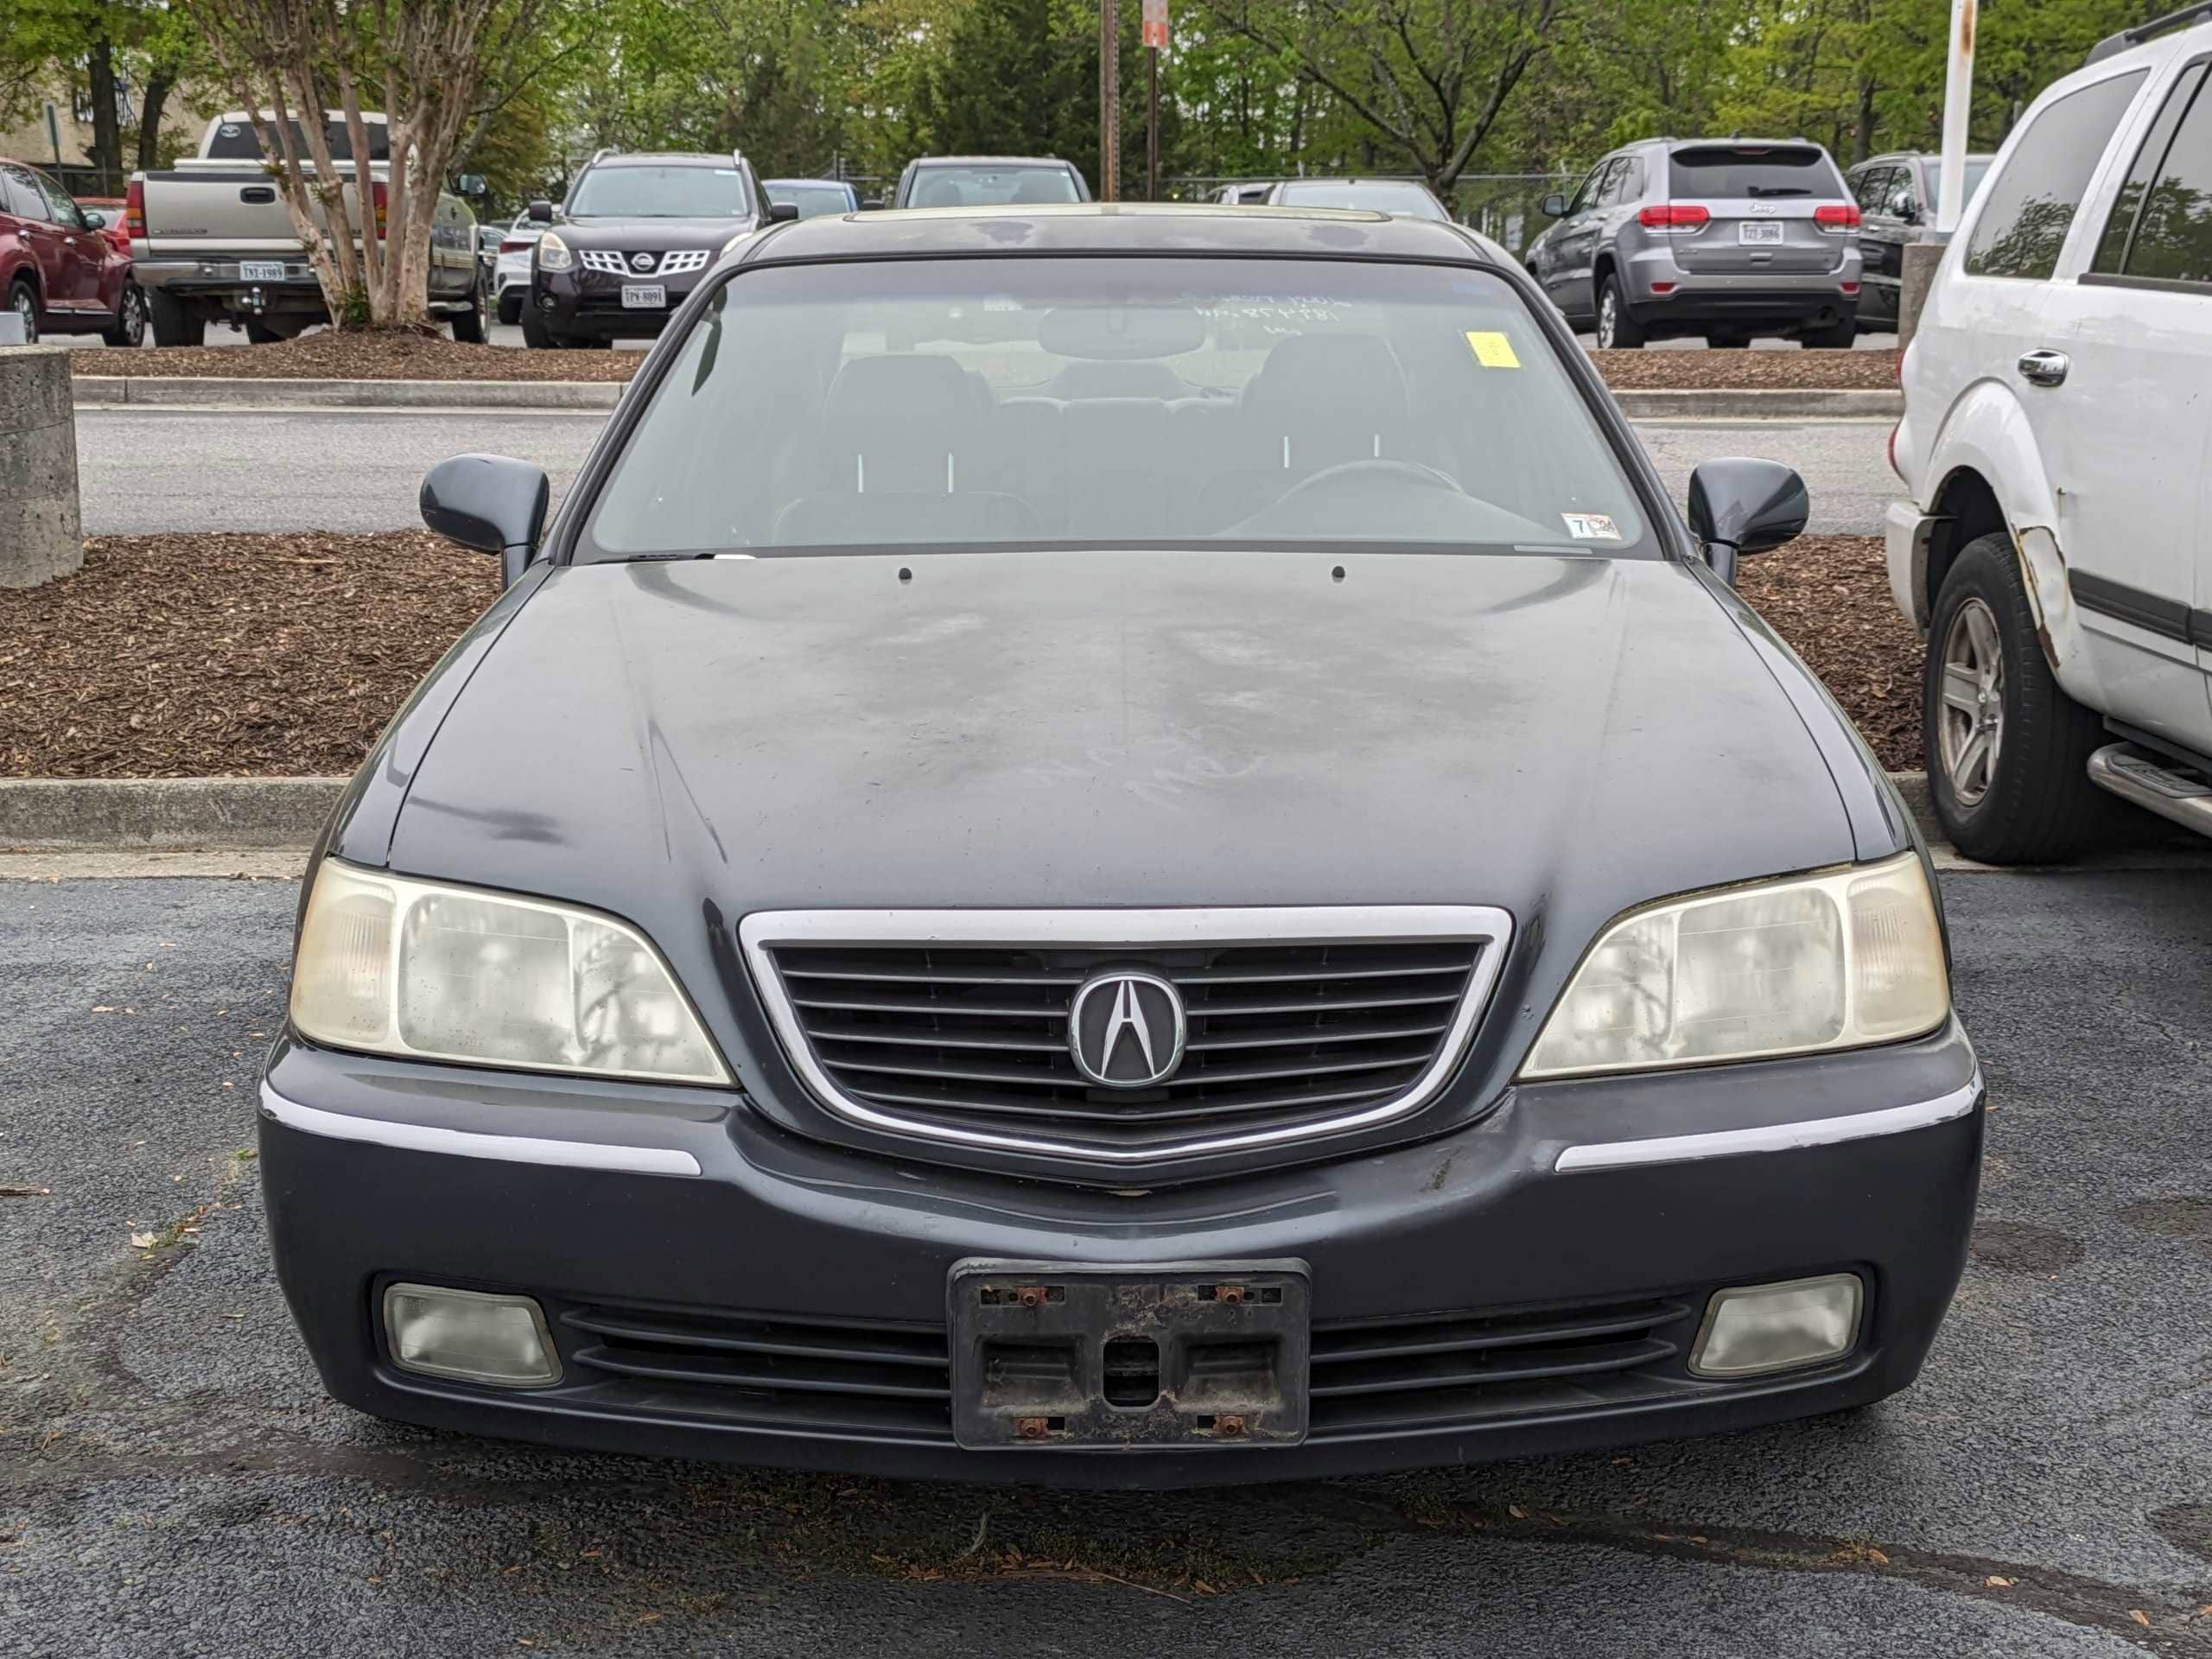 Used 2004 Acura RL  with VIN JH4KA96624C000364 for sale in Richmond, VA